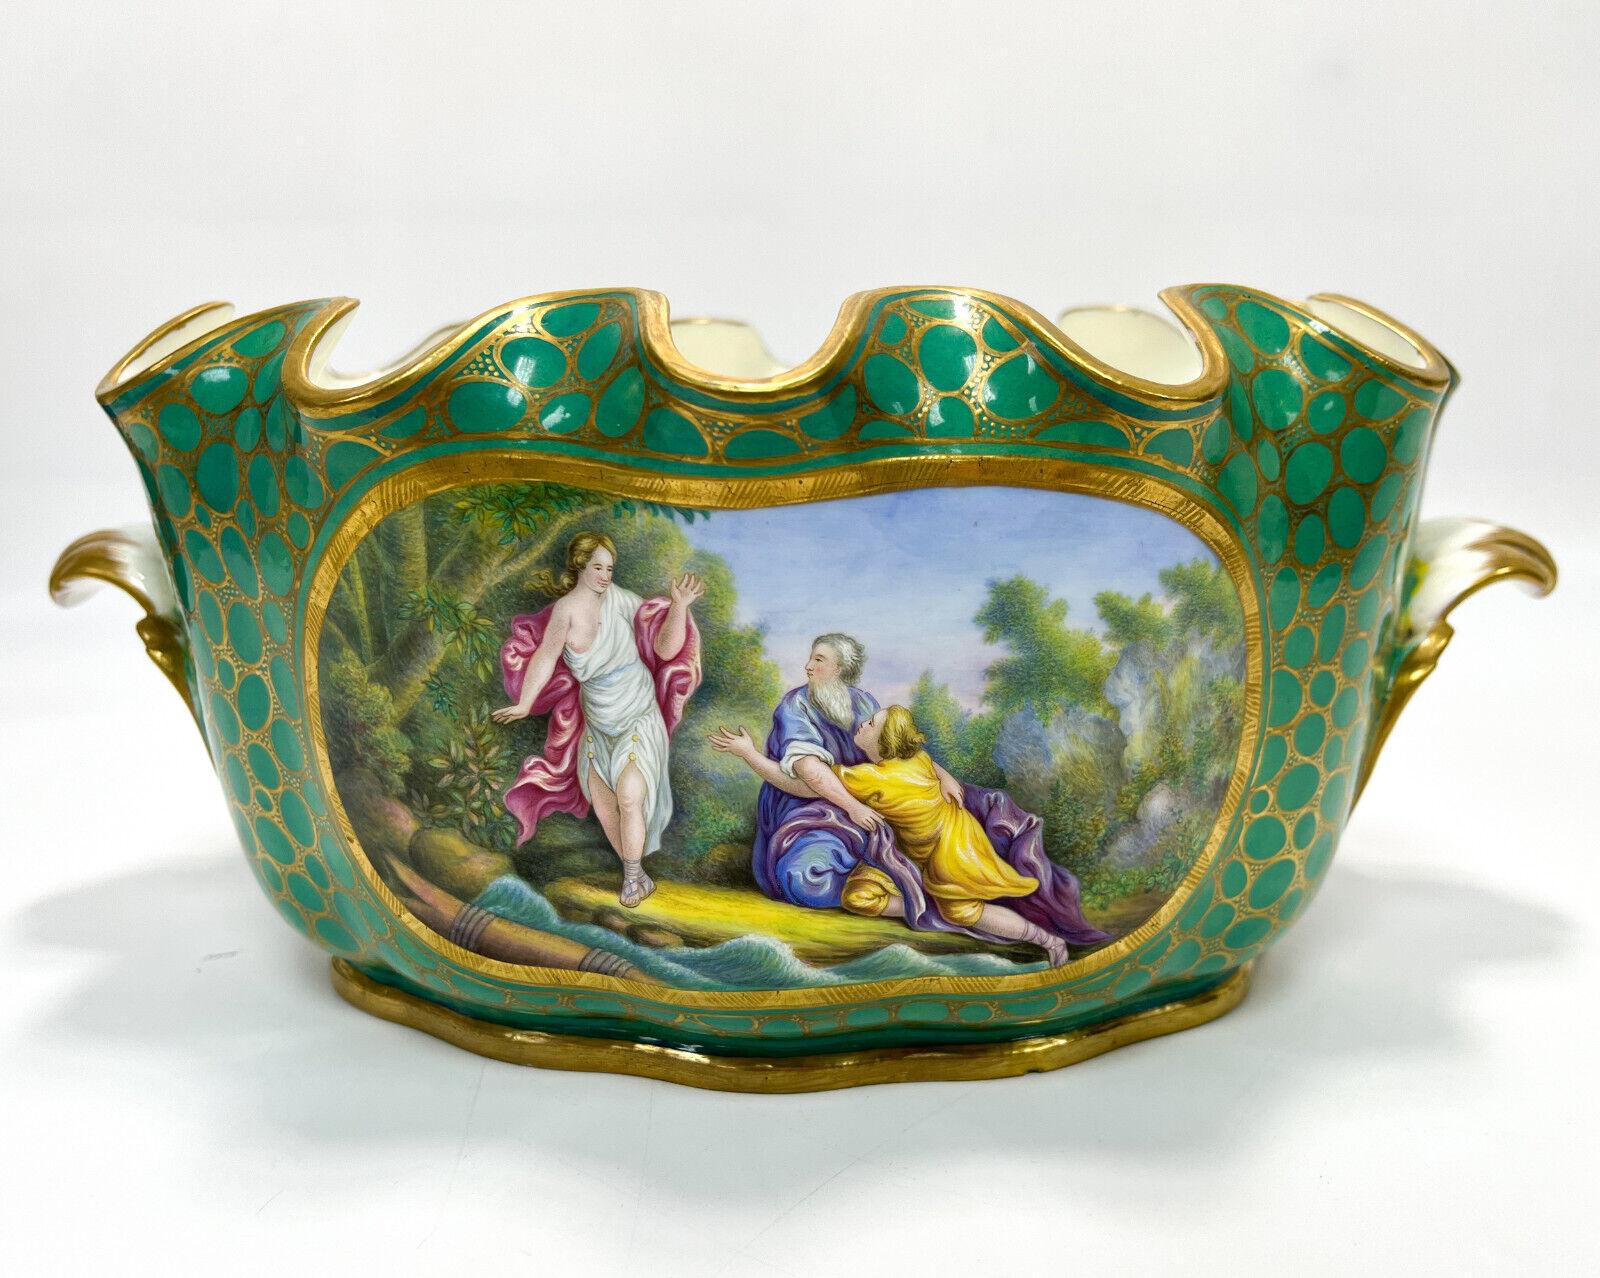 Sevres France hand painted Porcelain Monteith bowl, 19th century

A green ground with gilt cartouche decoration framing scenes of figures in classical dress to each side. Foliate handles, a scalloped rim. Underside with Sevres mark.

Additional